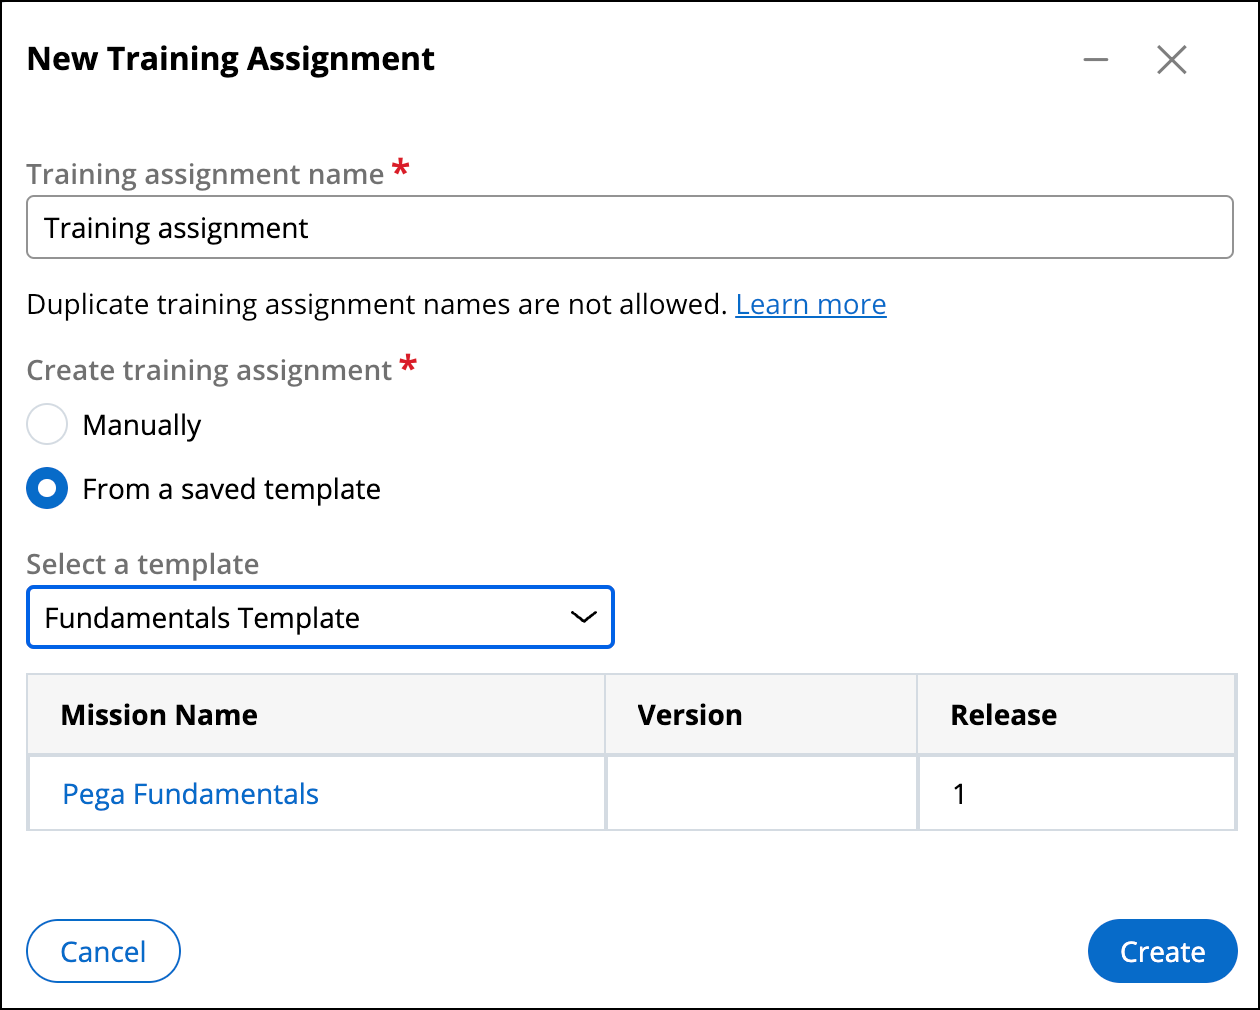 New Training assignment - adding missions from template